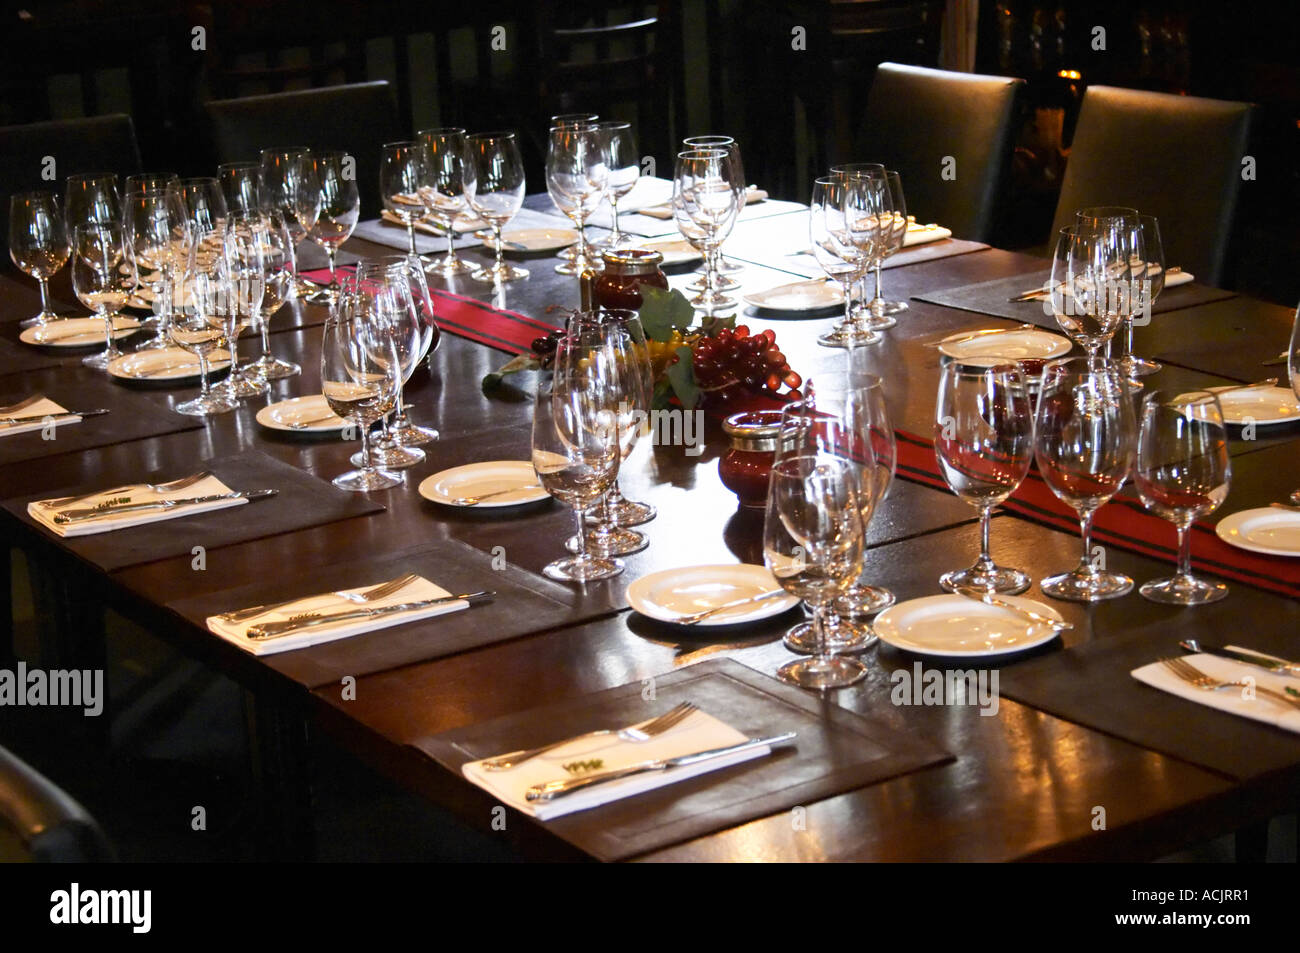 Table set for lunch guests with many wine glasses for tasting and knives and forks and other silverware. The O’Farrell Restaurant, Acassuso, Buenos Aires Argentina, South America Stock Photo